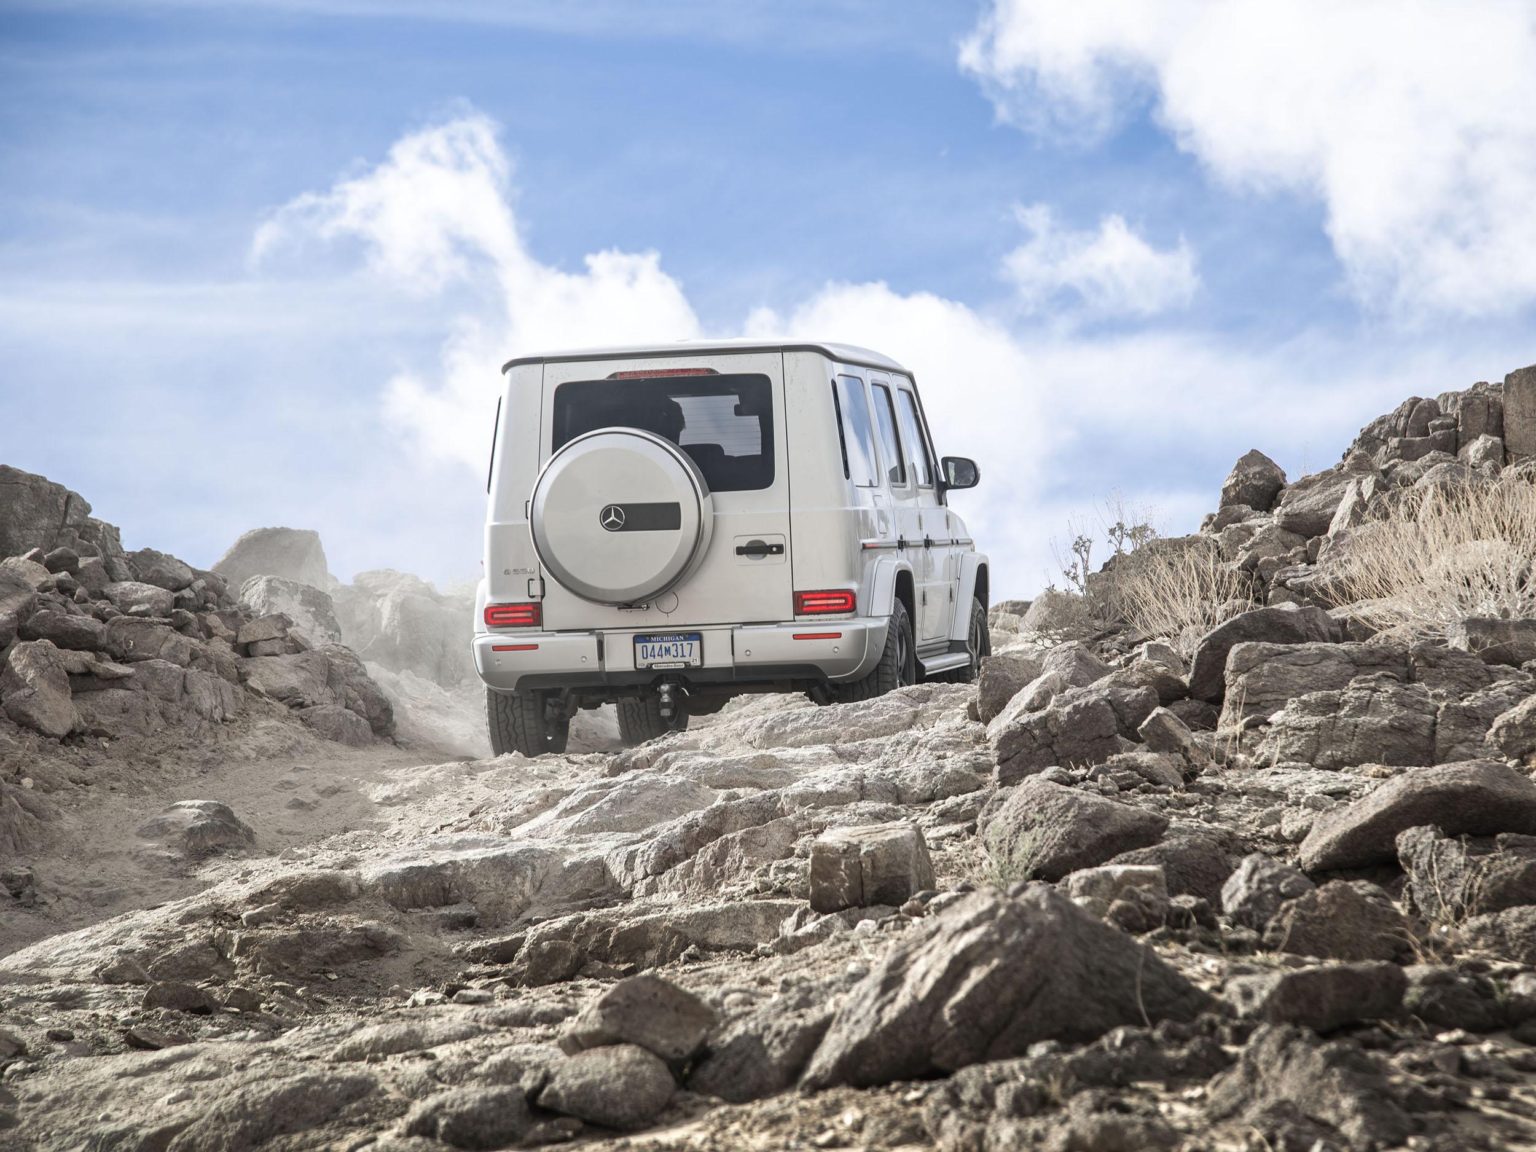 The 2020 Mercedes-Benz G-Class is a capable and luxurious SUV.